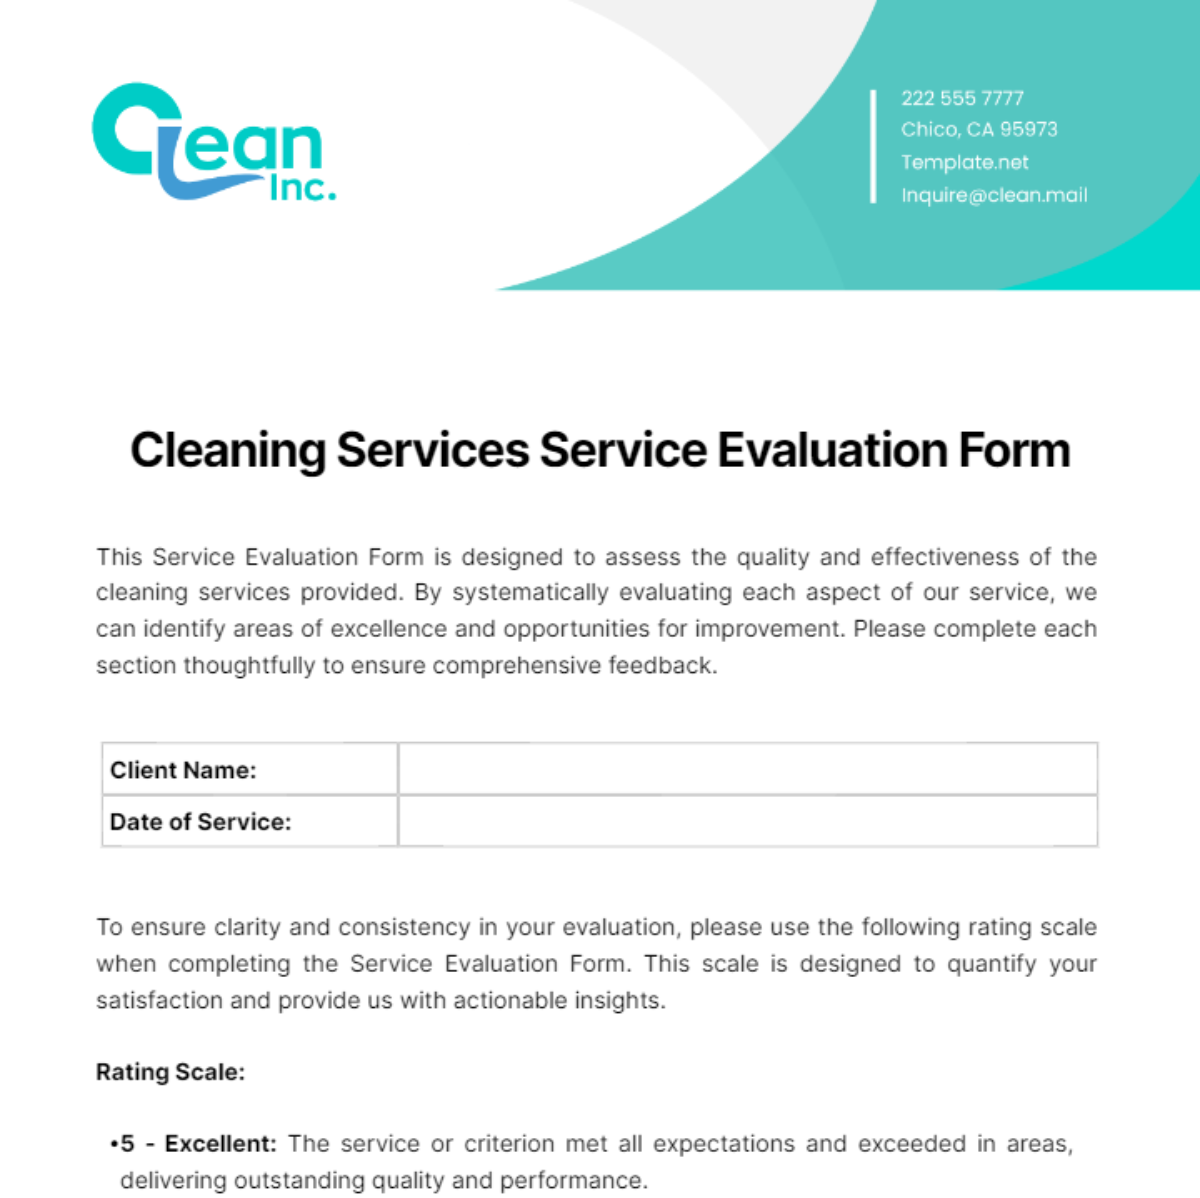 Cleaning Services Service Evaluation Form Template